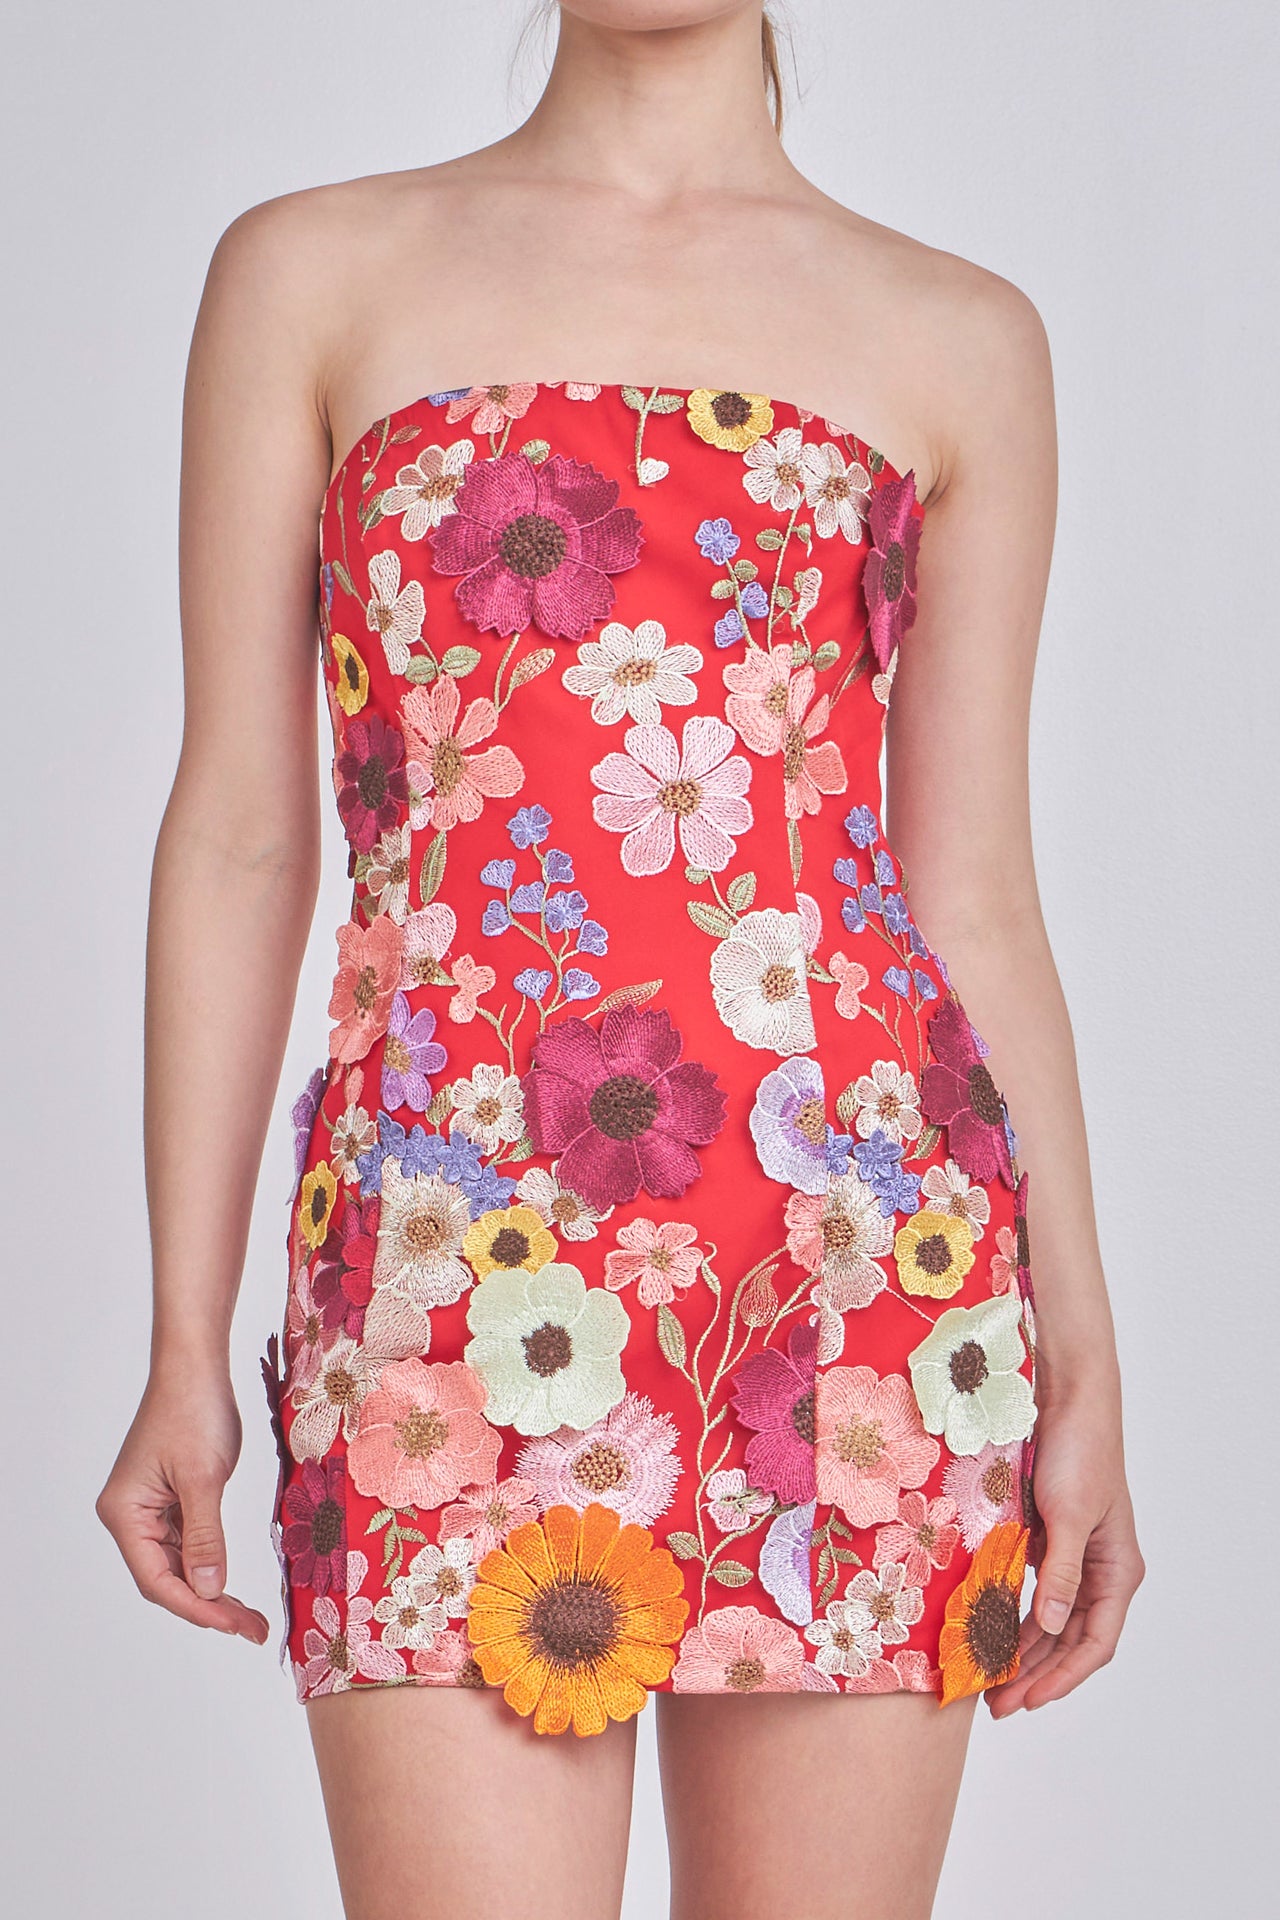 Endless Rose - Floral Embroidered Mini Dress - Dresses in Women's Clothing available at endlessrose.com